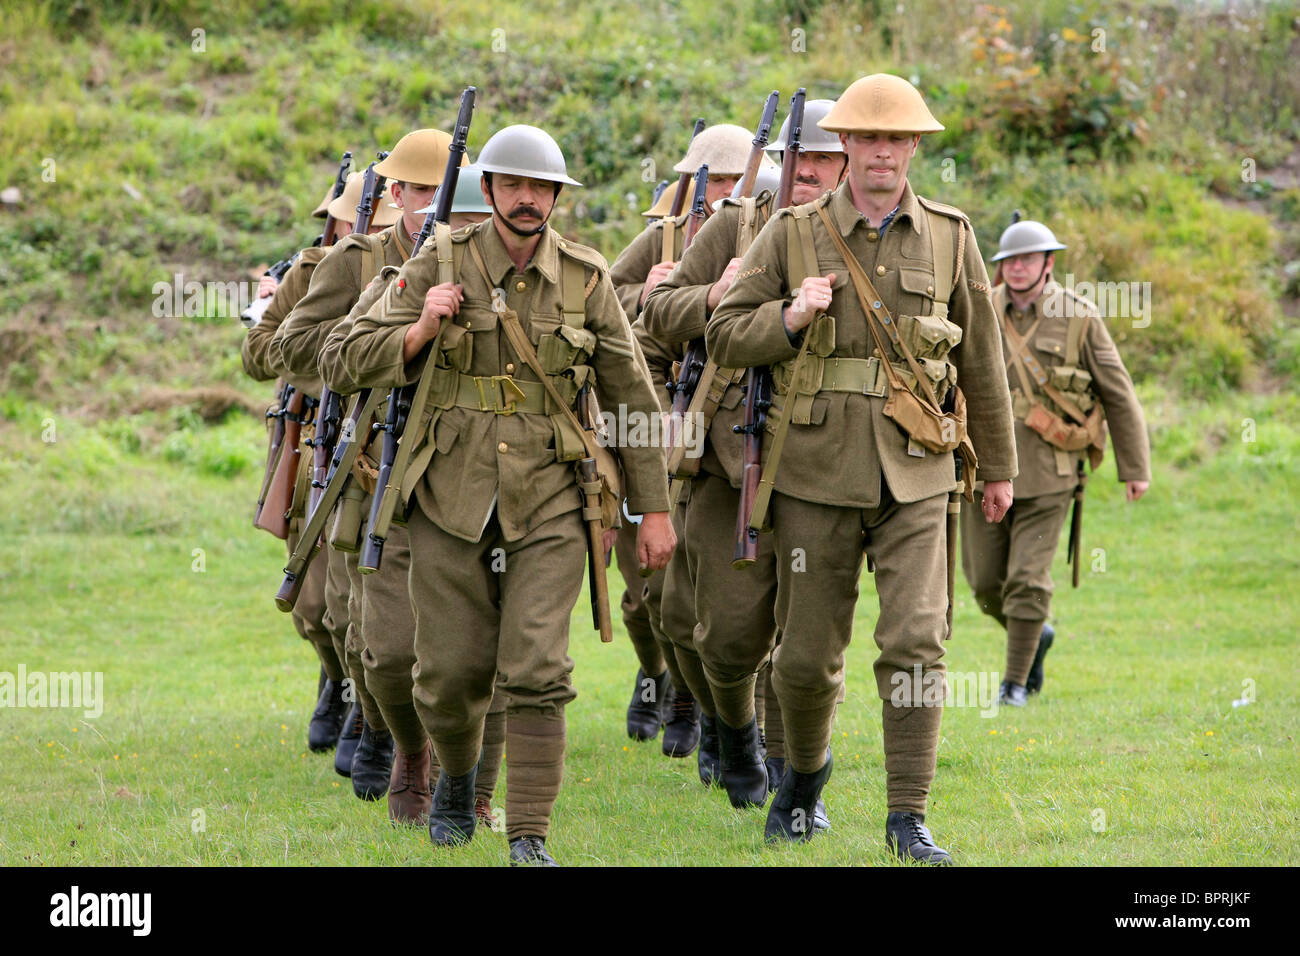 Group of WW1 British reenactment group demonstrate Army drill Stock Photo